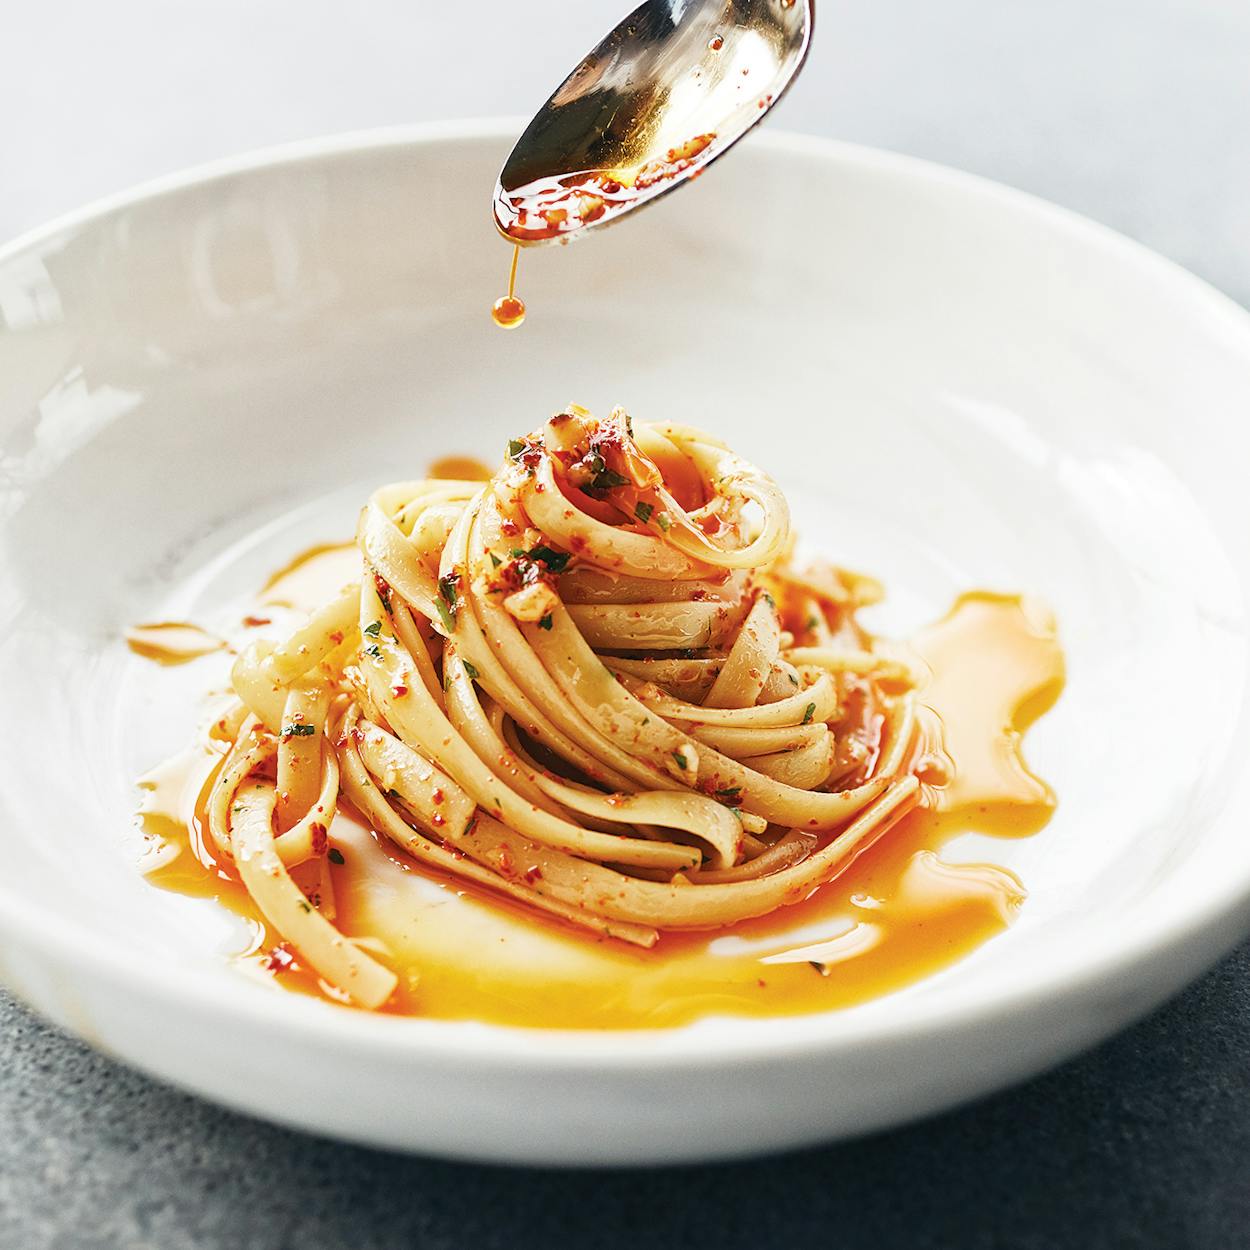 Tagliatelle with red pepper flakes in Texas olive oil.